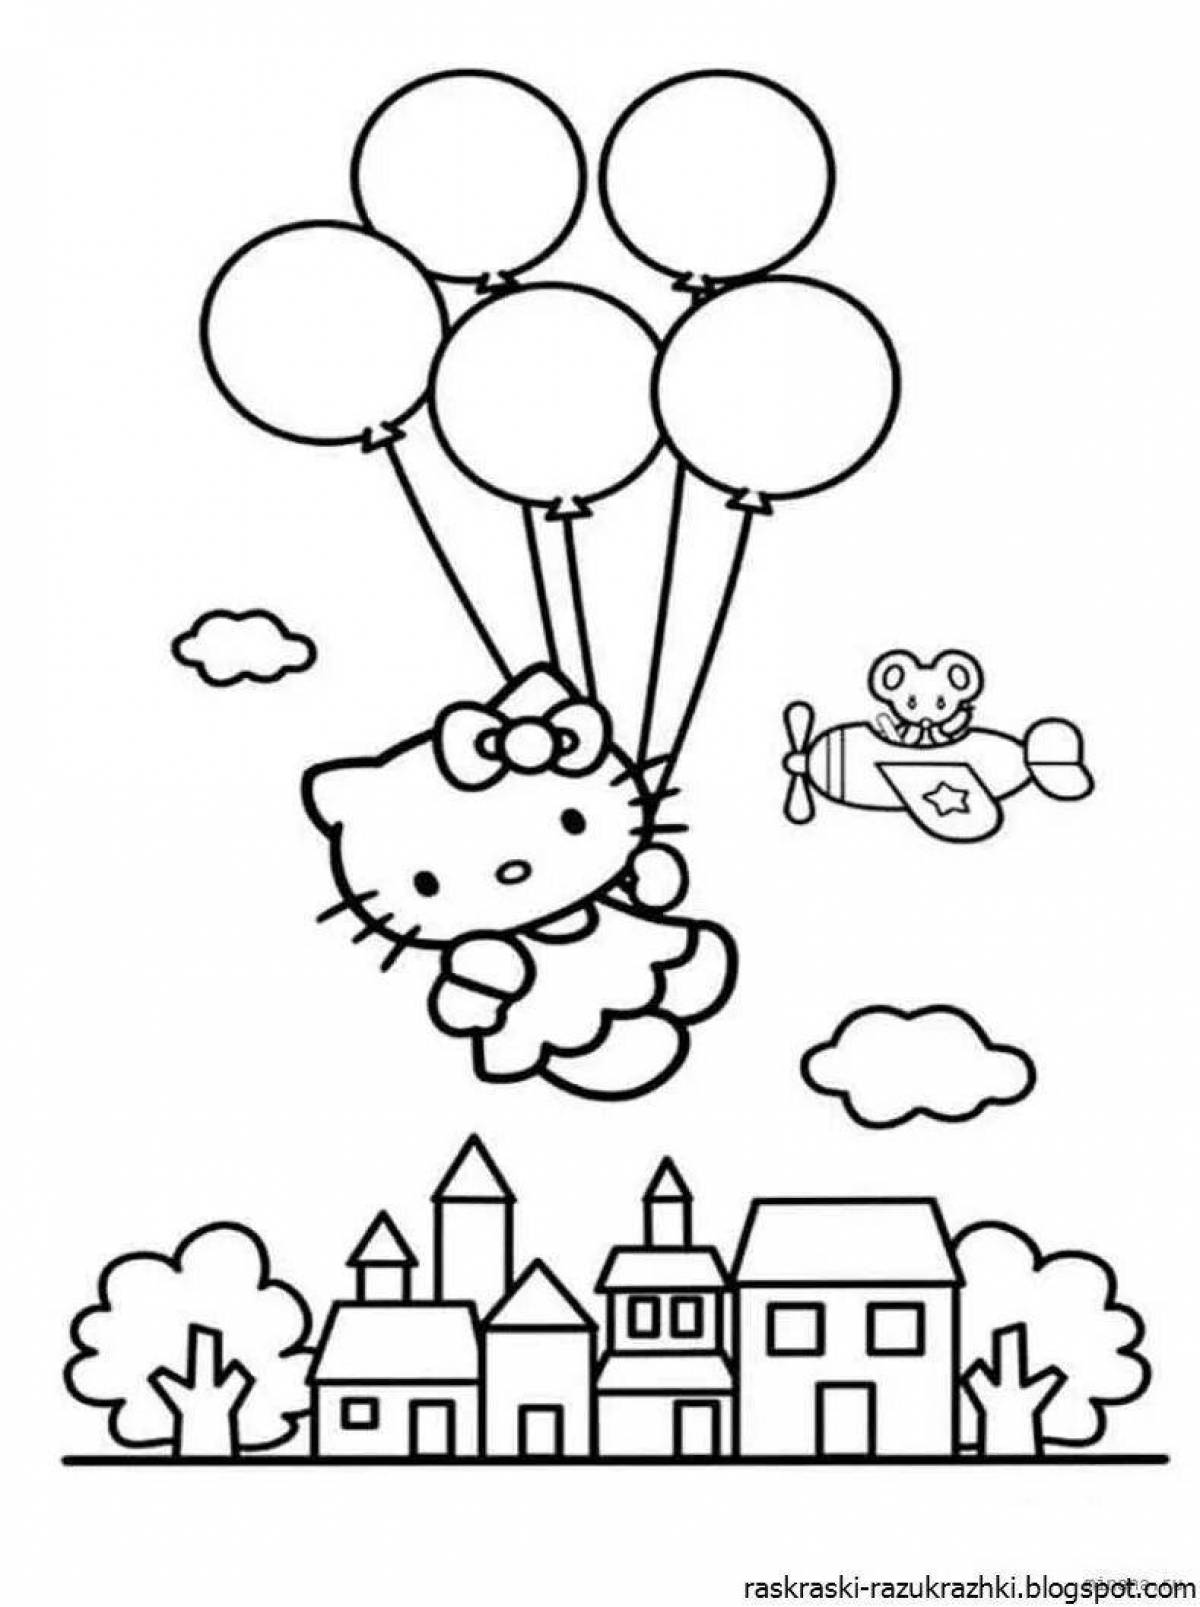 Fun ball coloring book for 2-3 year olds